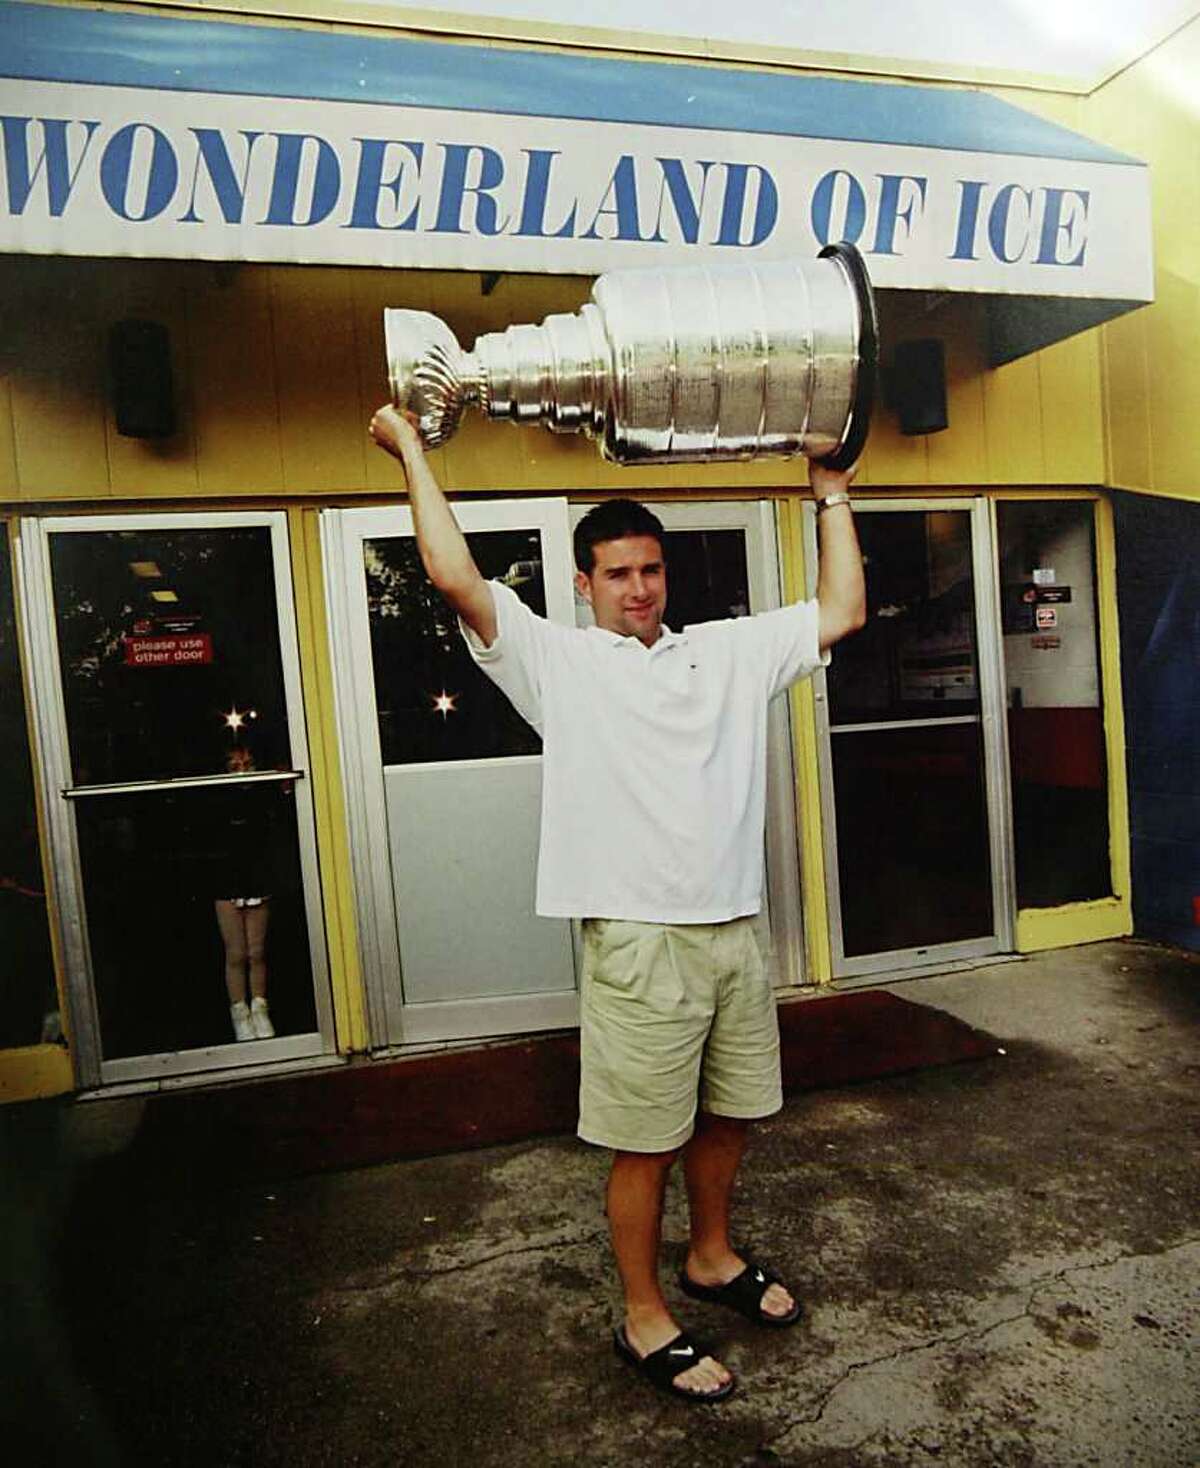 After winning the NHL Championship as a member of the Colorado Avalanche in 2001, Chris Drury returned to the Wonderland of Ice, in Bridgeport, with the Stanley Cup.